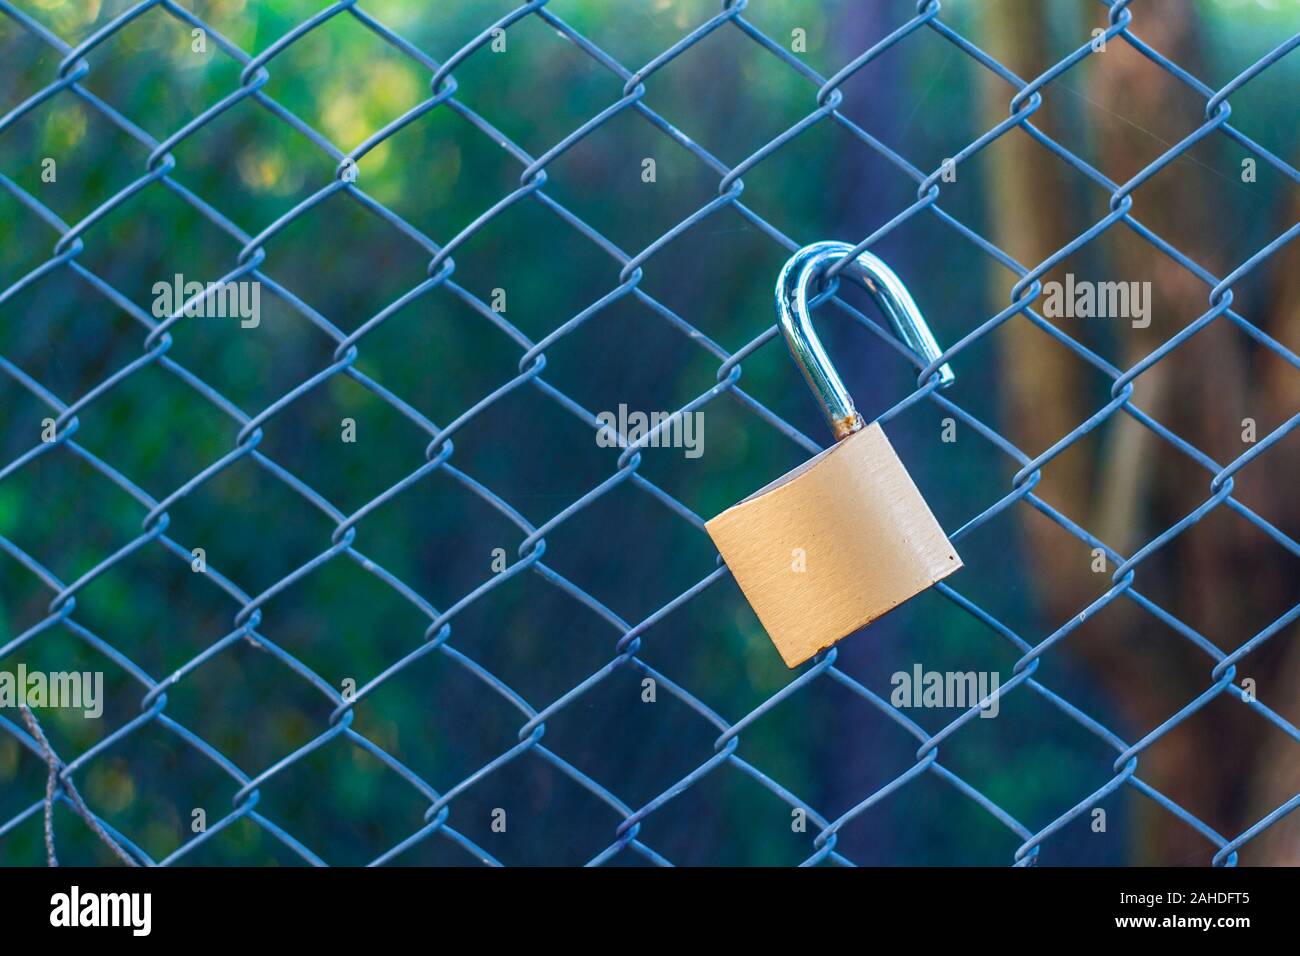 Open a bit rusty padlock hanging on fence wire netting with copy space Stock Photo